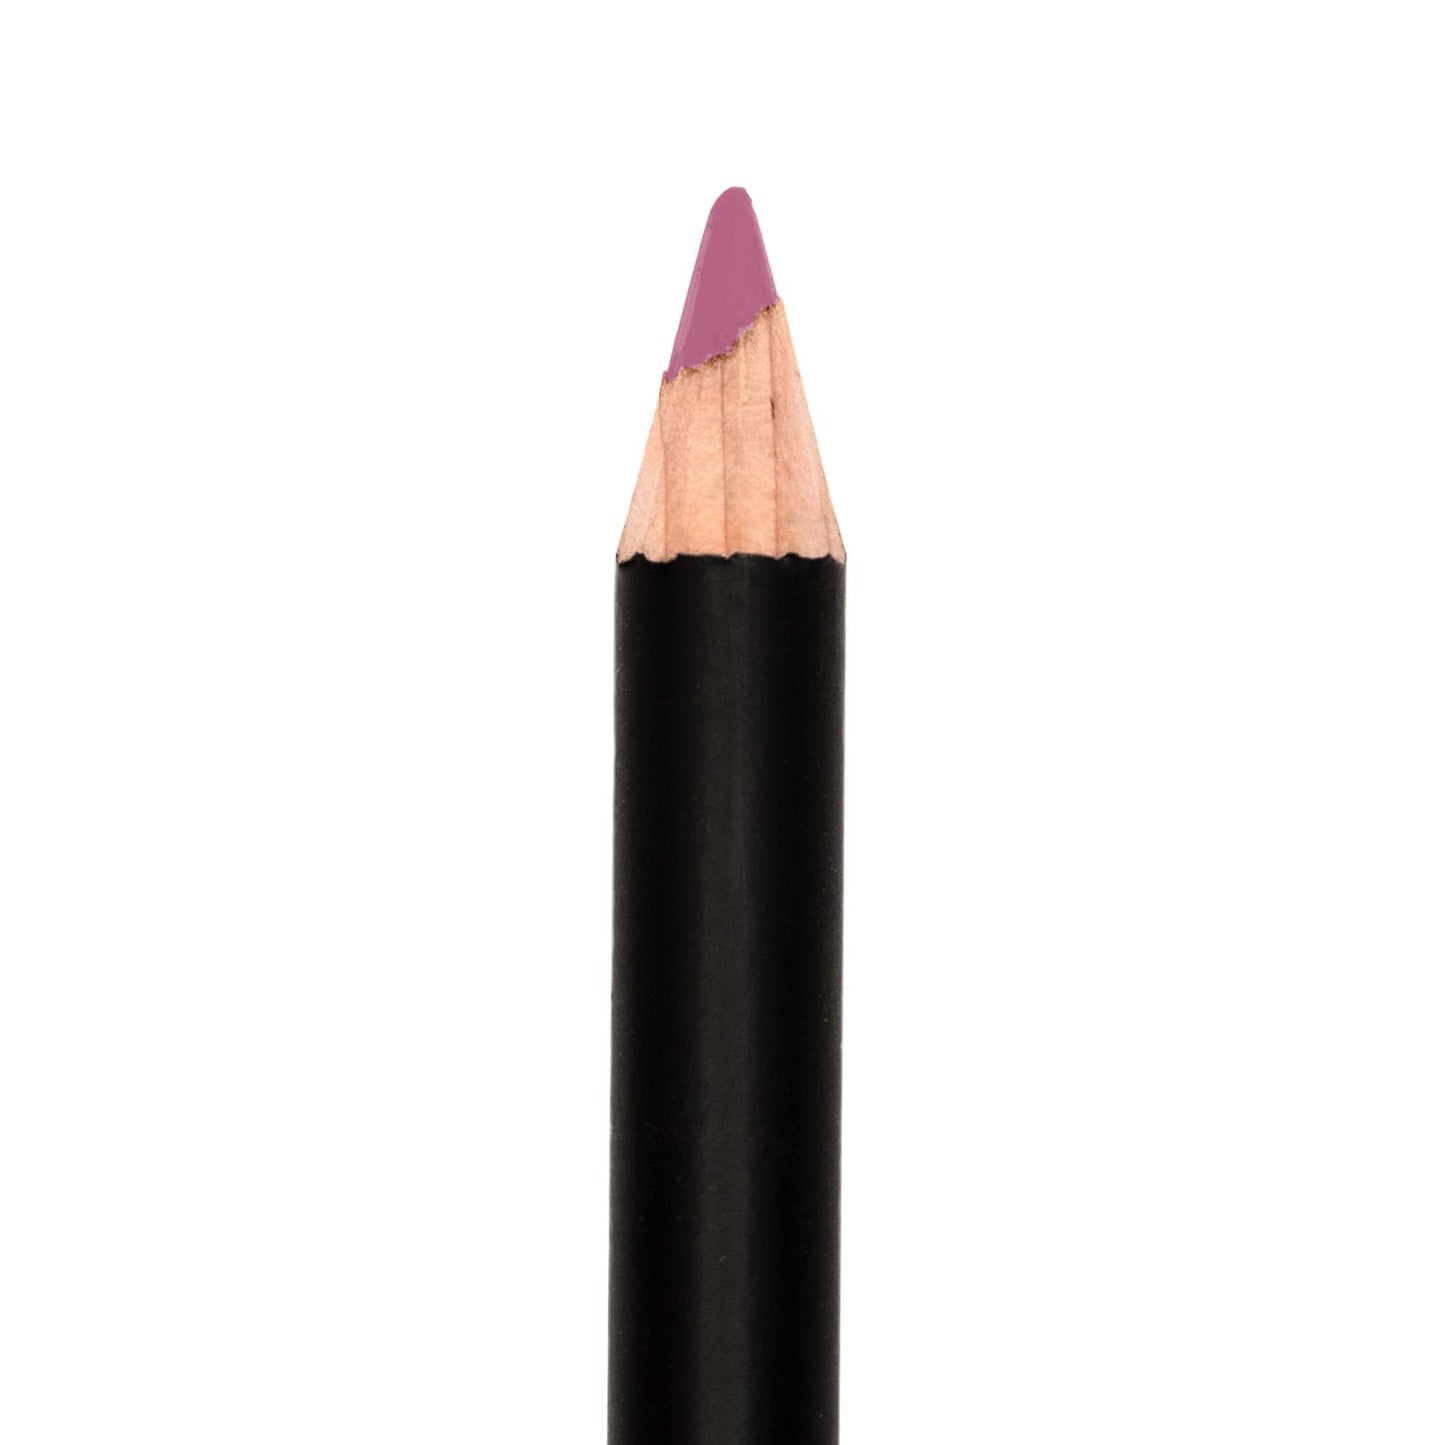  Pink Trance Lip Pencil from Cruisin Organics - the perfect complement to your lipstick, gloss, or liquid lips for a flawless finish. Start the new year off right with this versatile and artistic product.